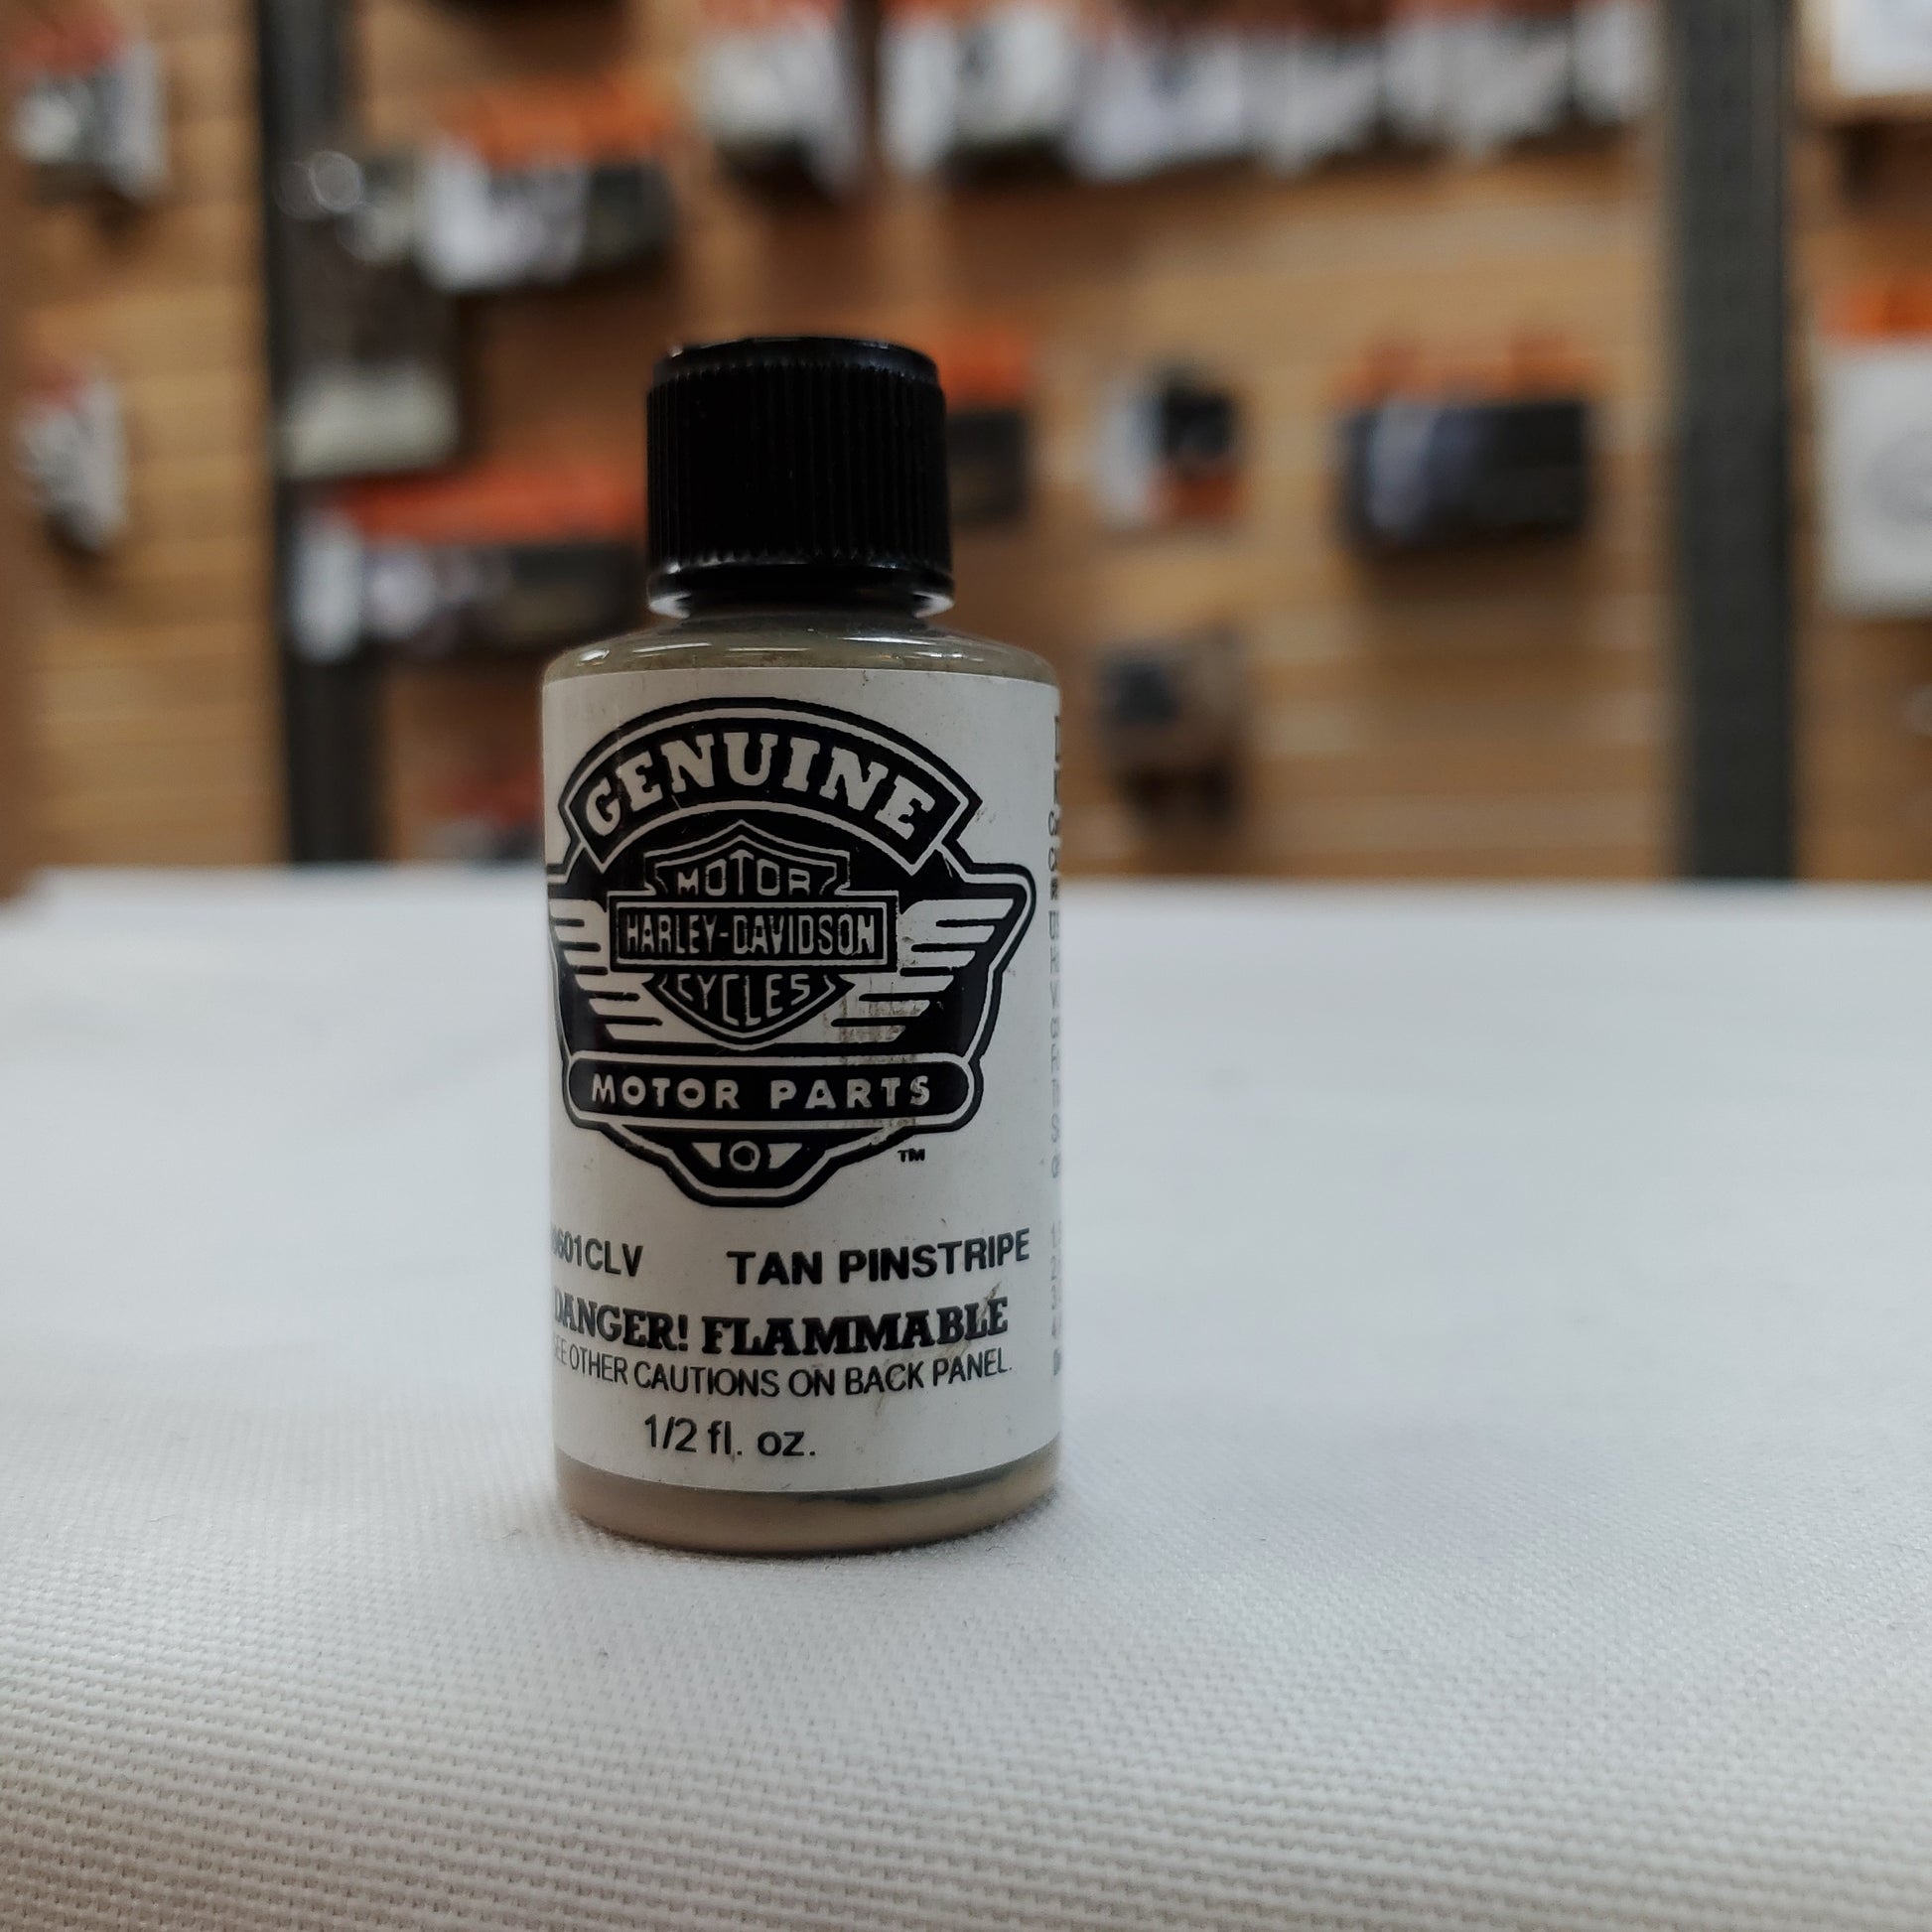 98601CLV Tan pinstripe touch up paint used for models in 2008, 2014, and 2015 harley-davidson paint colors